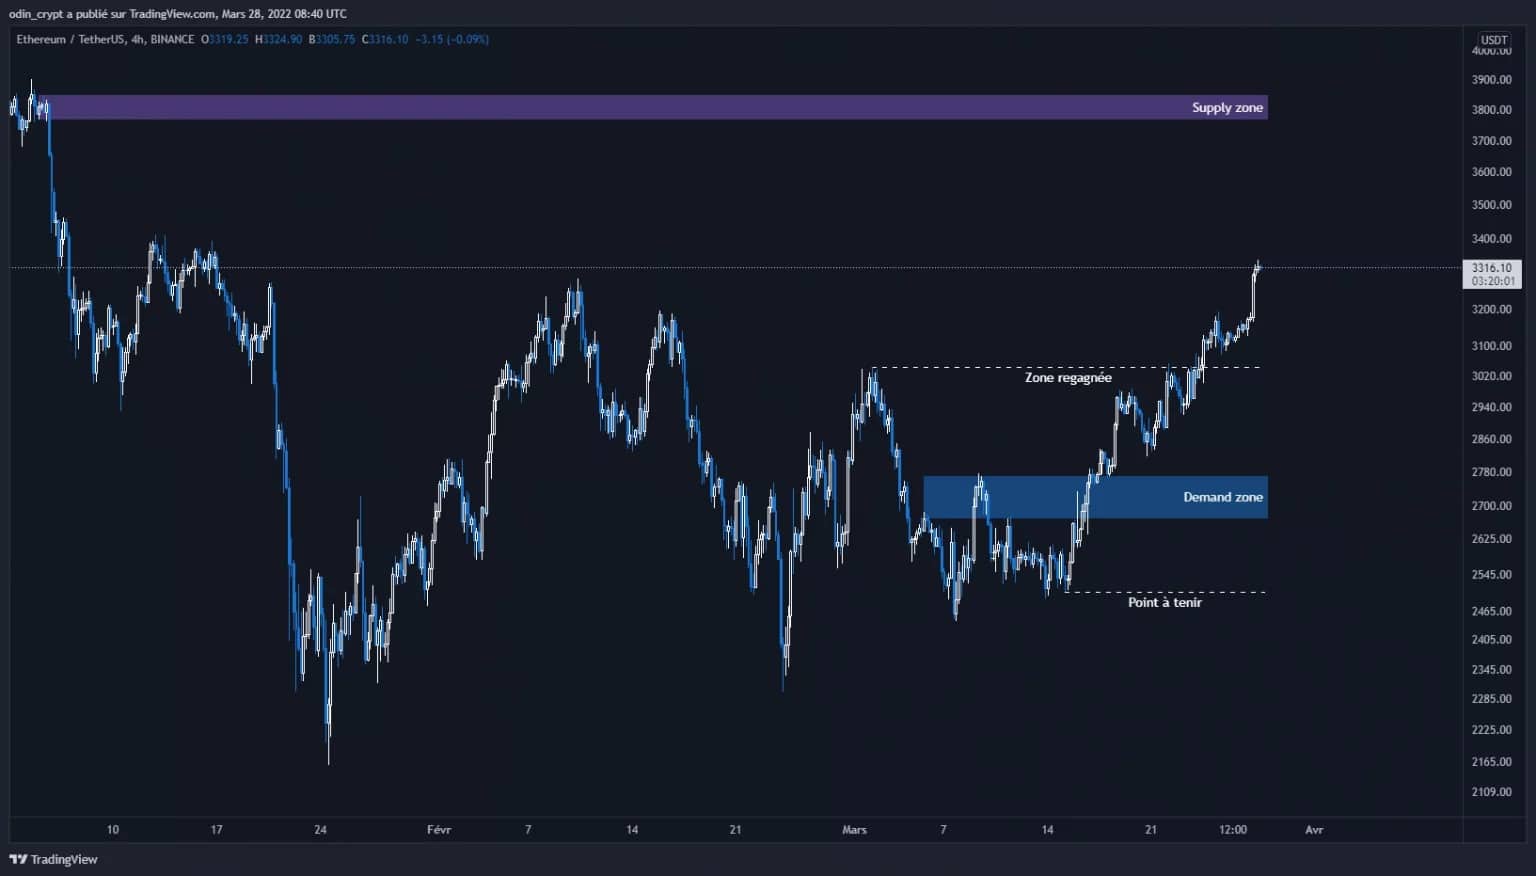 Ether (ETH) analysis in 4h